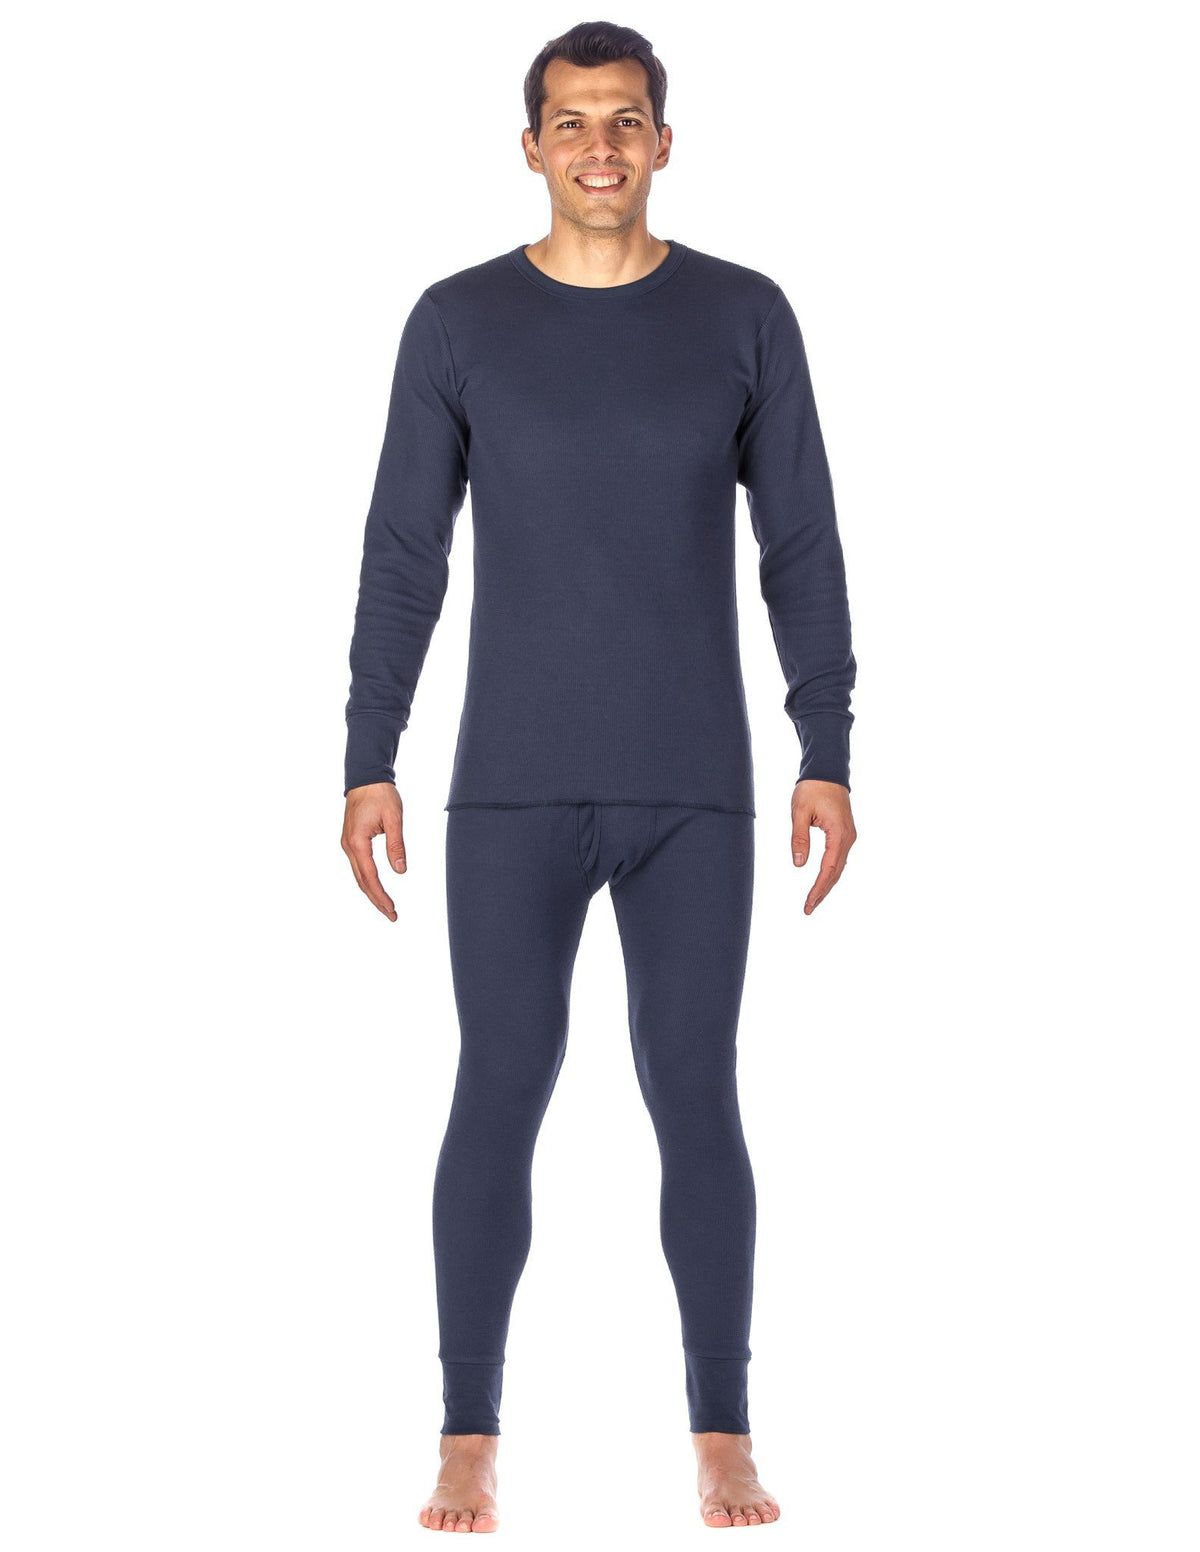 Men's Extreme Cold Waffle Knit Thermal Top and Bottom Set - Dark Blue